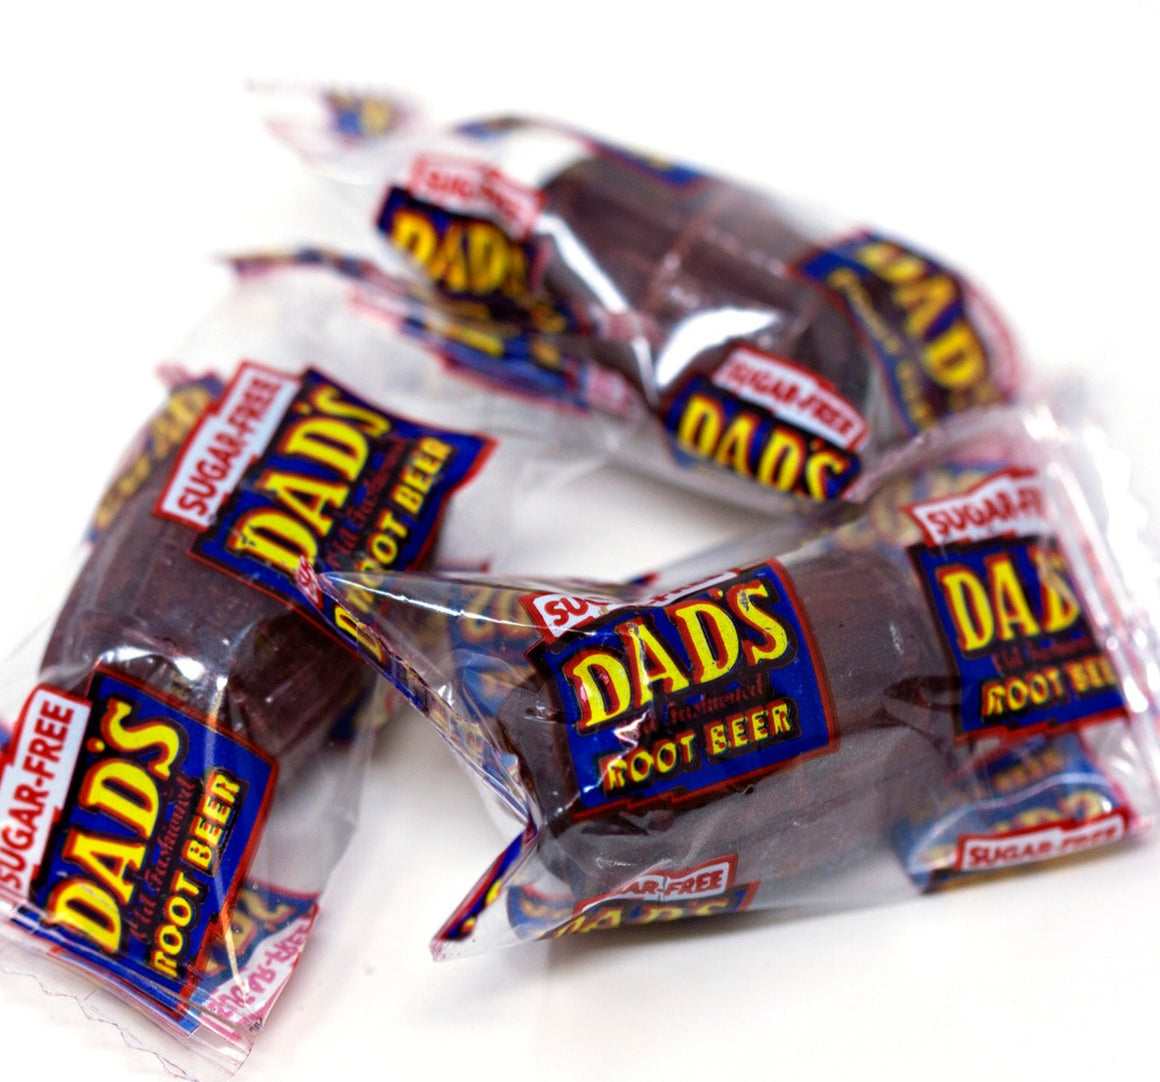 All City Candy Dad's Sugar Free Root Beer Barrels Hard Candy - 2 lb Bulk Bag For fresh candy and great service, visit www.allcitycandy.com